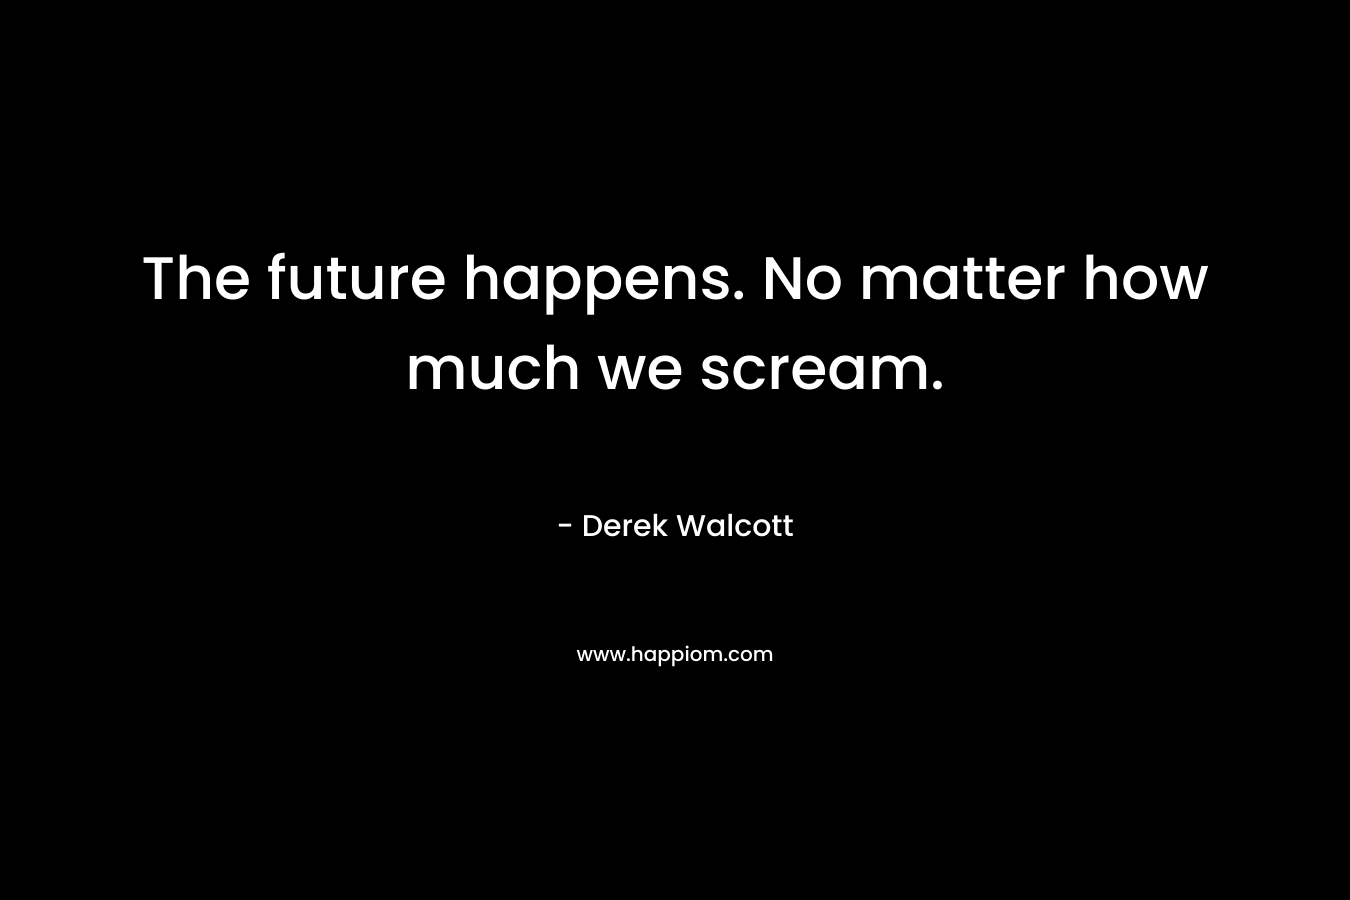 The future happens. No matter how much we scream.